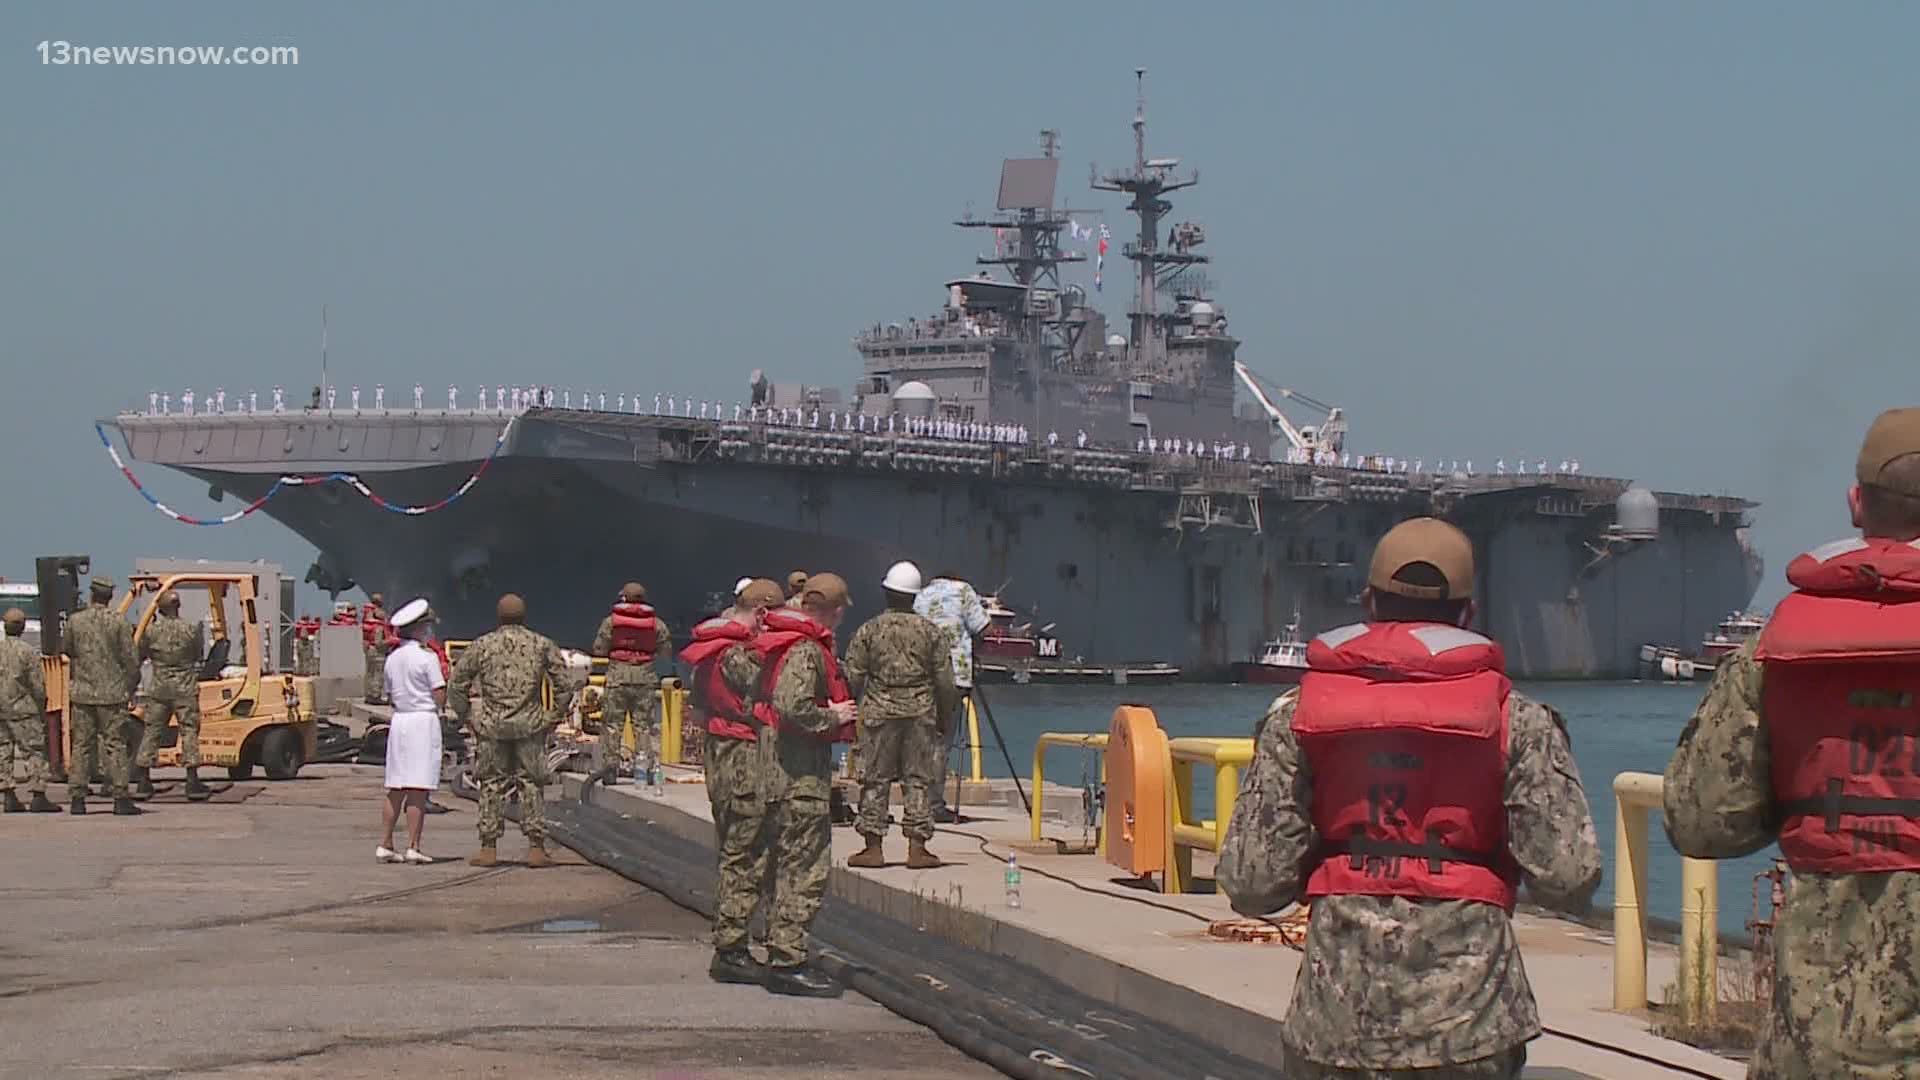 Sailors and Marines aboard the USS Bataan were welcomed home by family and friends.